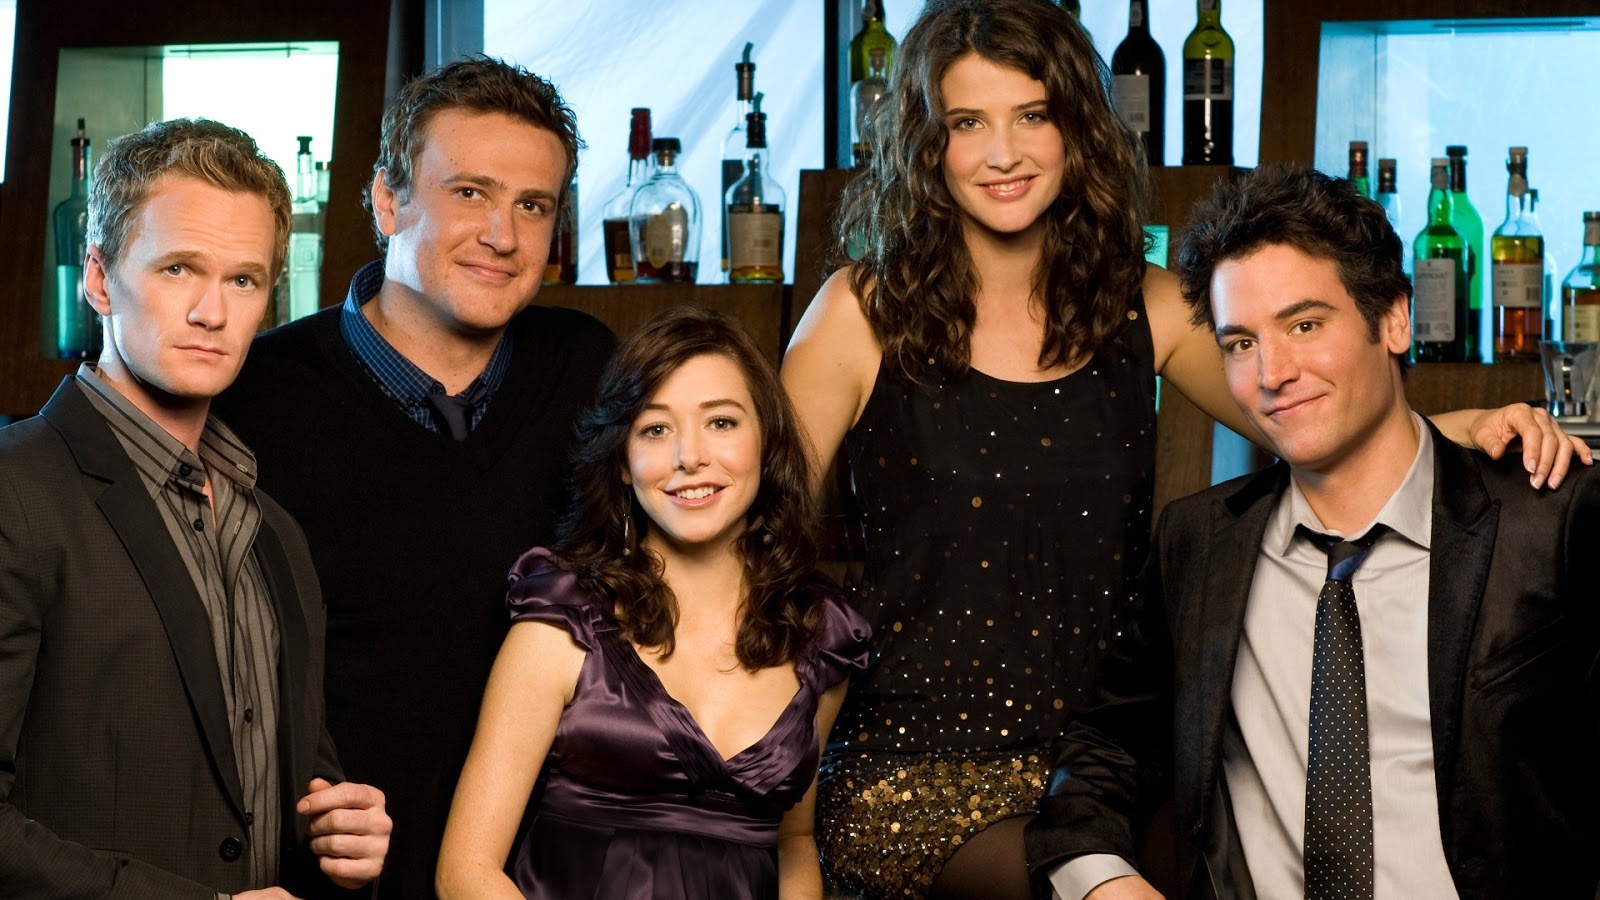 How I Met Your Mother Poster Gallery6 Tv Series Posters And Cast